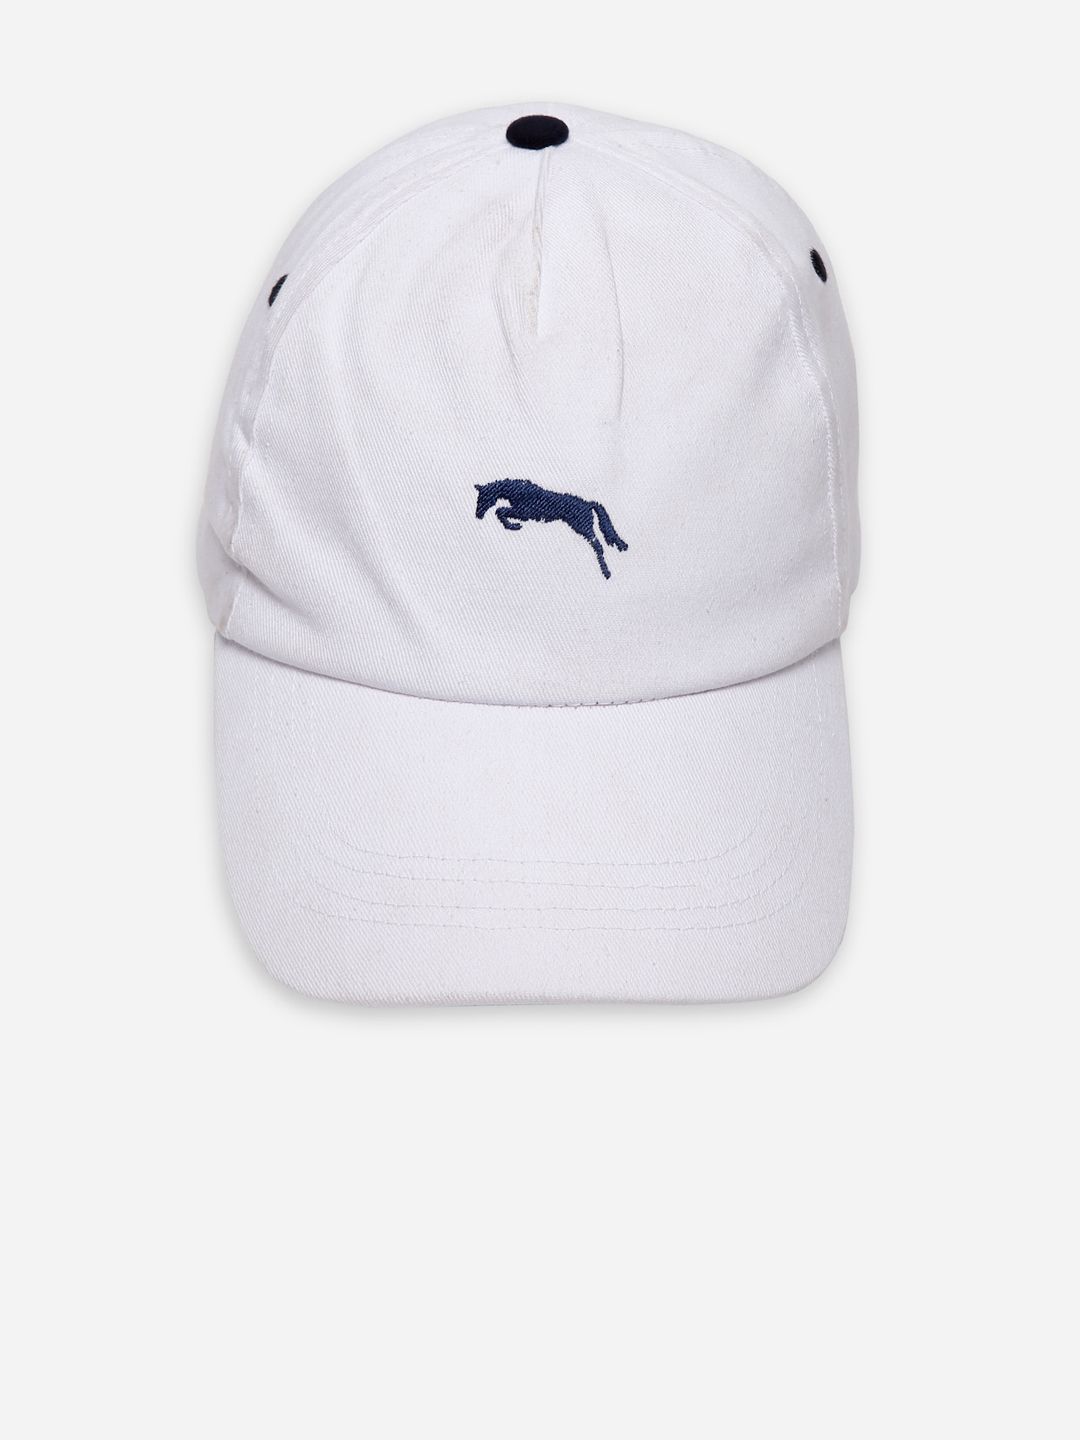 JUMP USA Unisex White Embroidered Baseball Cap Price in India